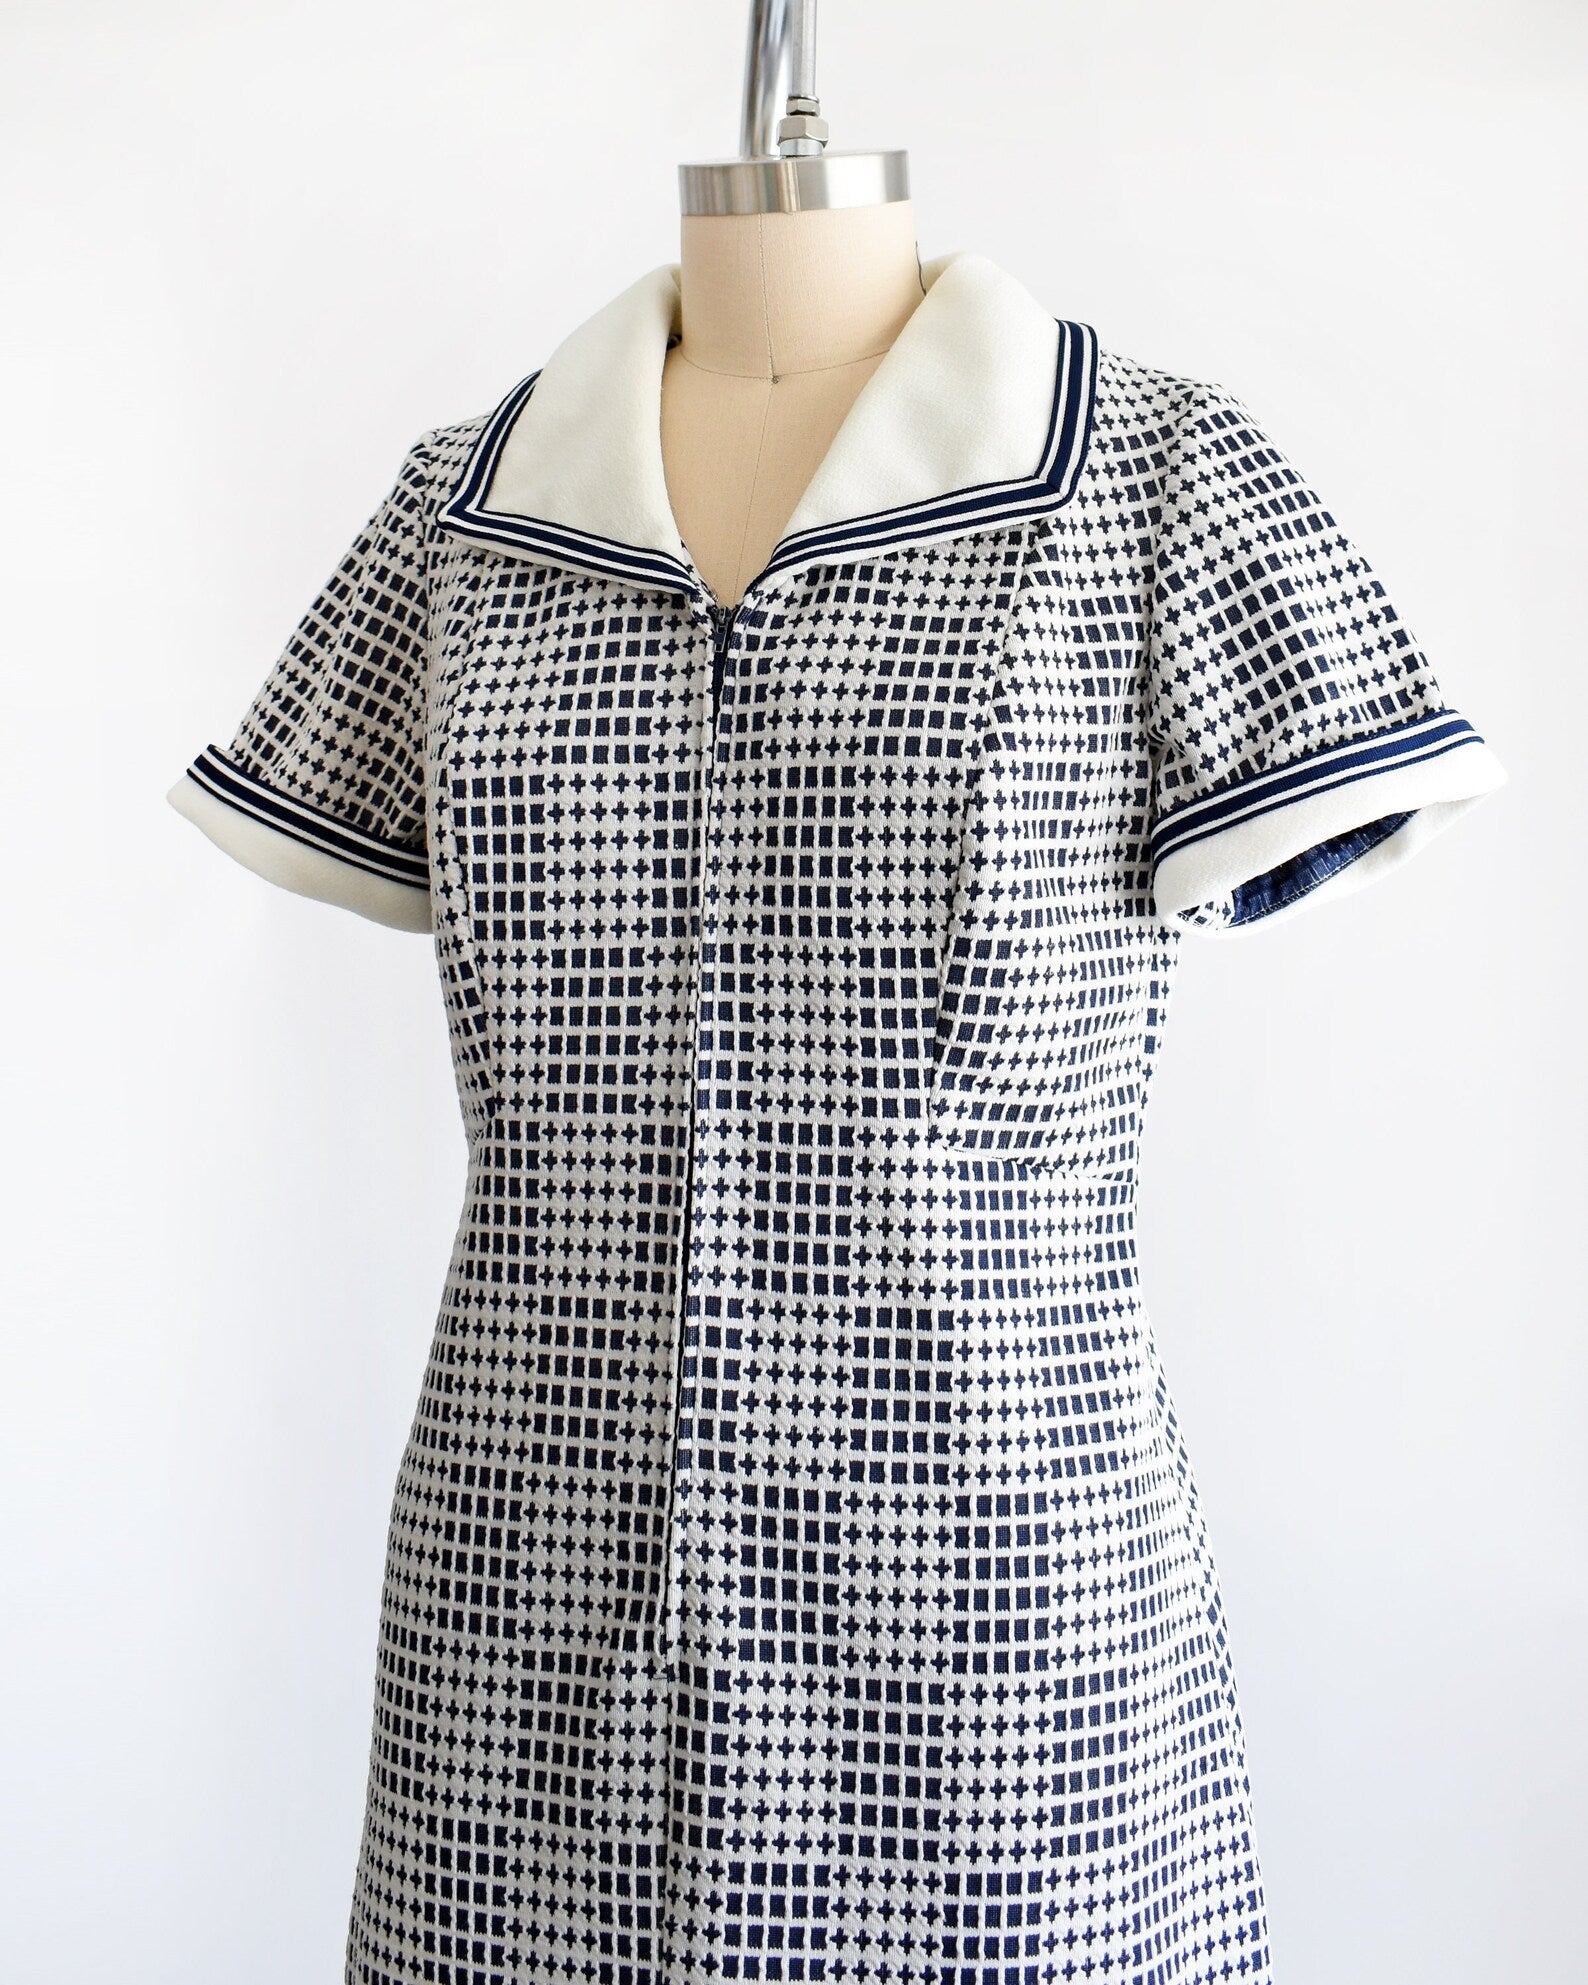 Side front view of a vintage 70s mod dress that has a blue and white geometric print, white wide collar with navy trim, zip up front, and matching white and navy trim on the short sleeves. The dress is on a dress form.